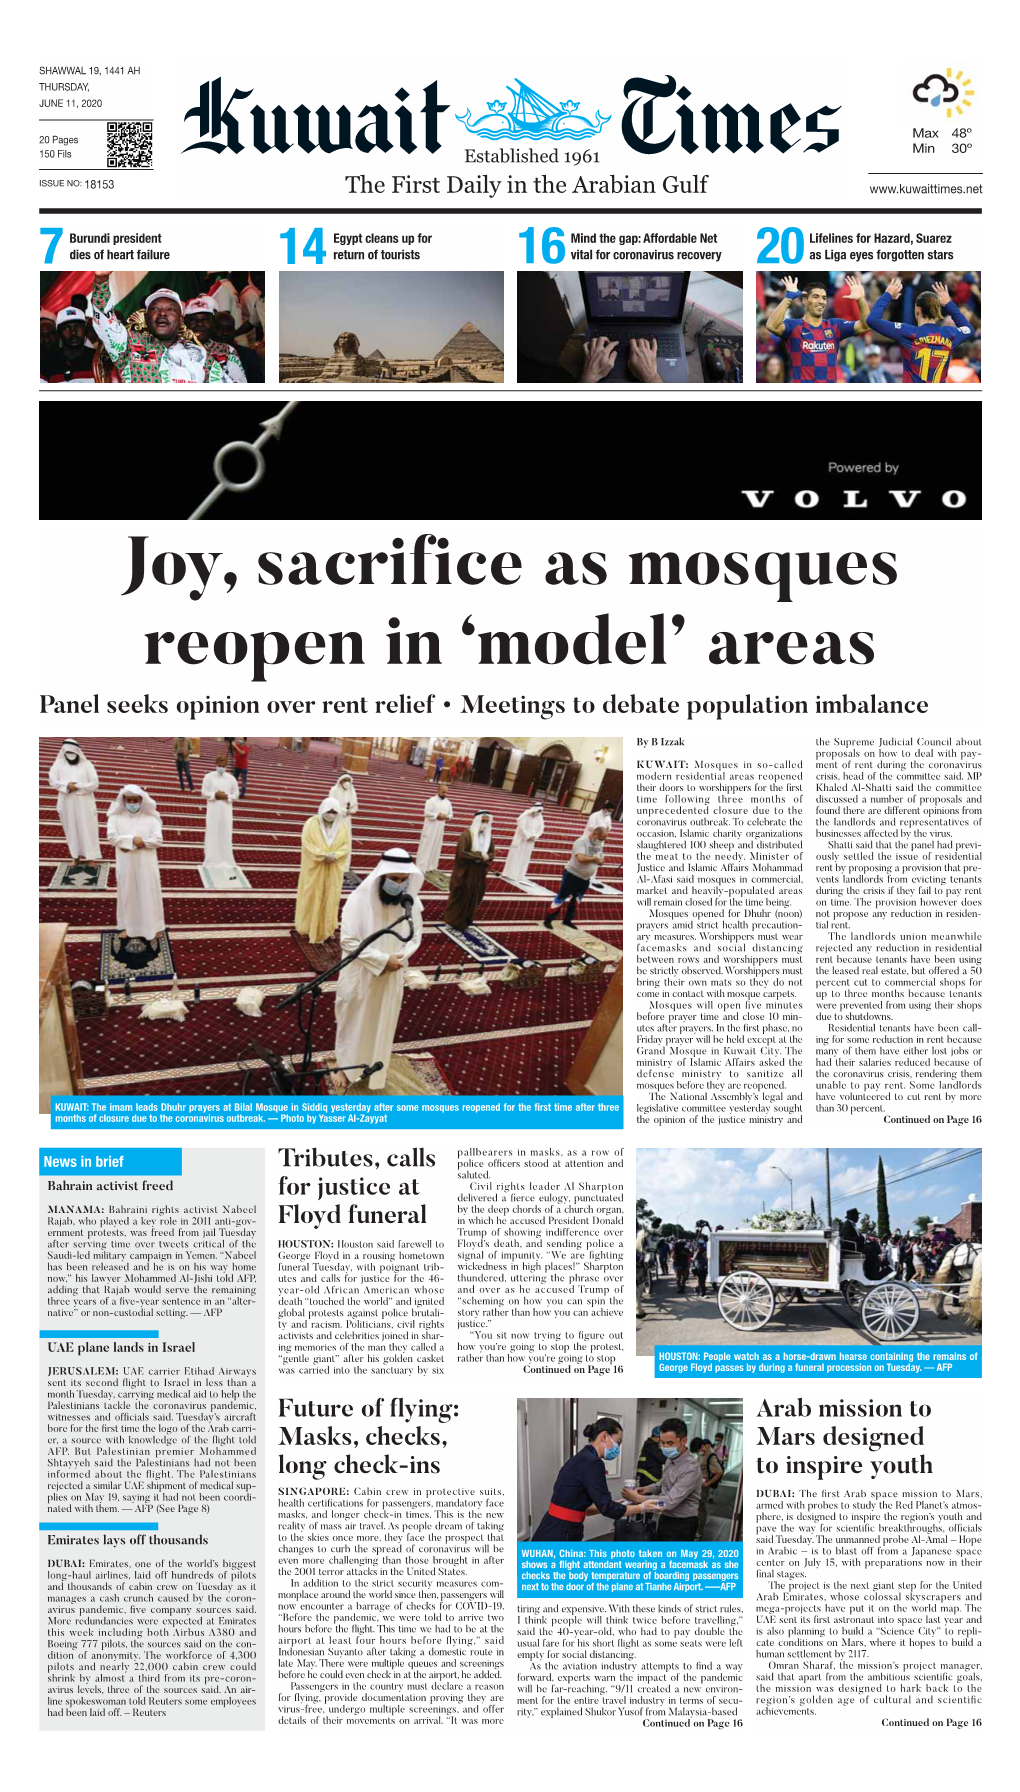 Joy, Sacrifice As Mosques Reopen in ‘Model’ Areas